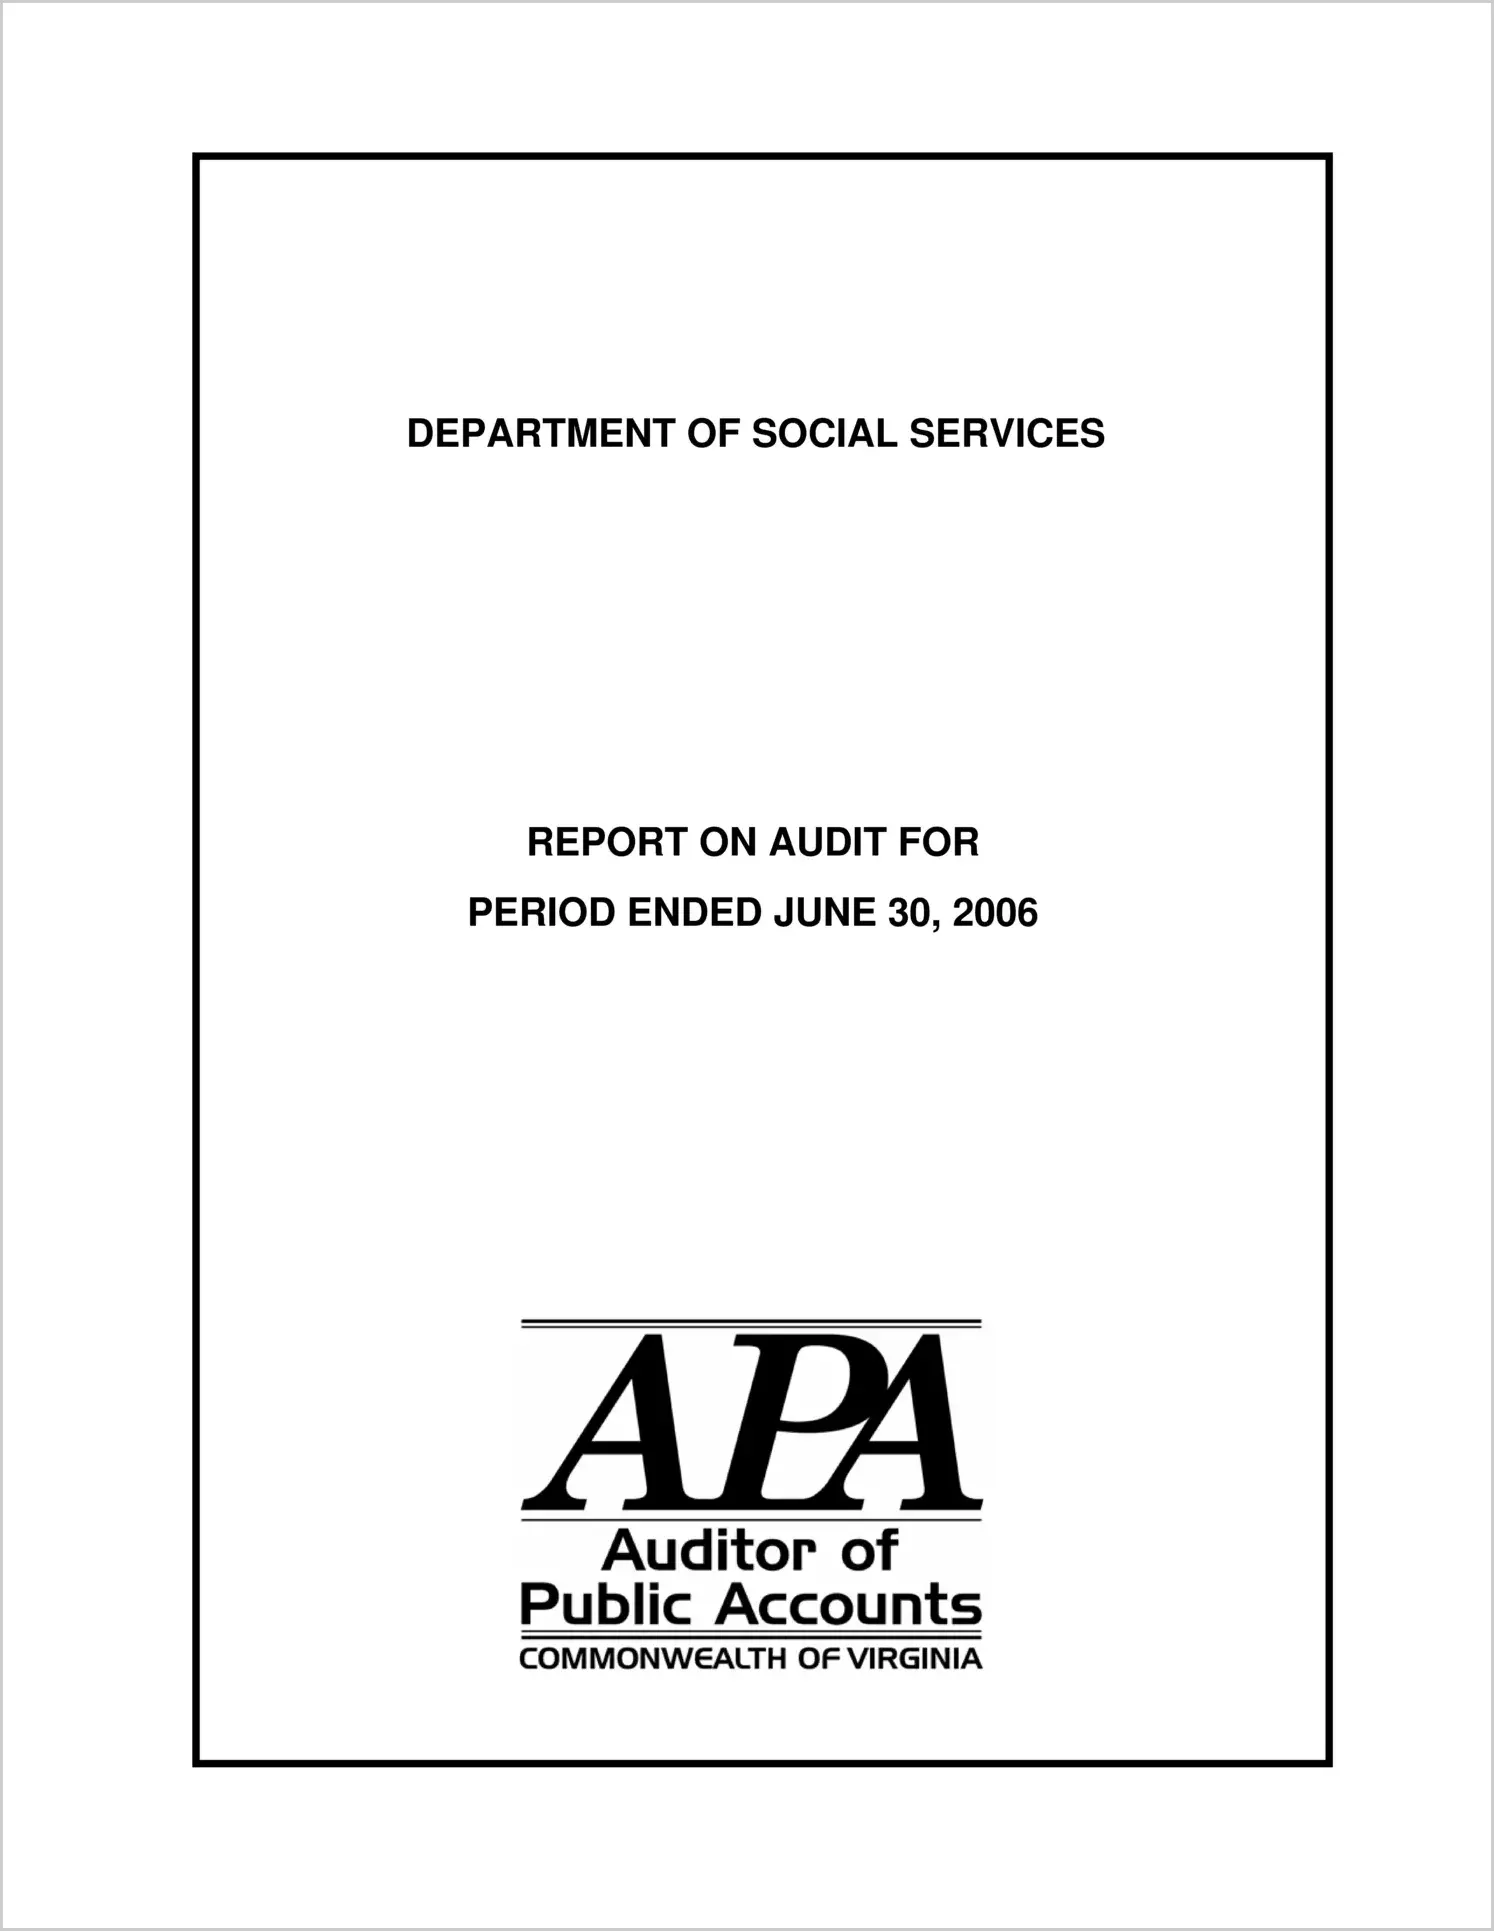 Department of Social Services for the year ended June 30, 2006